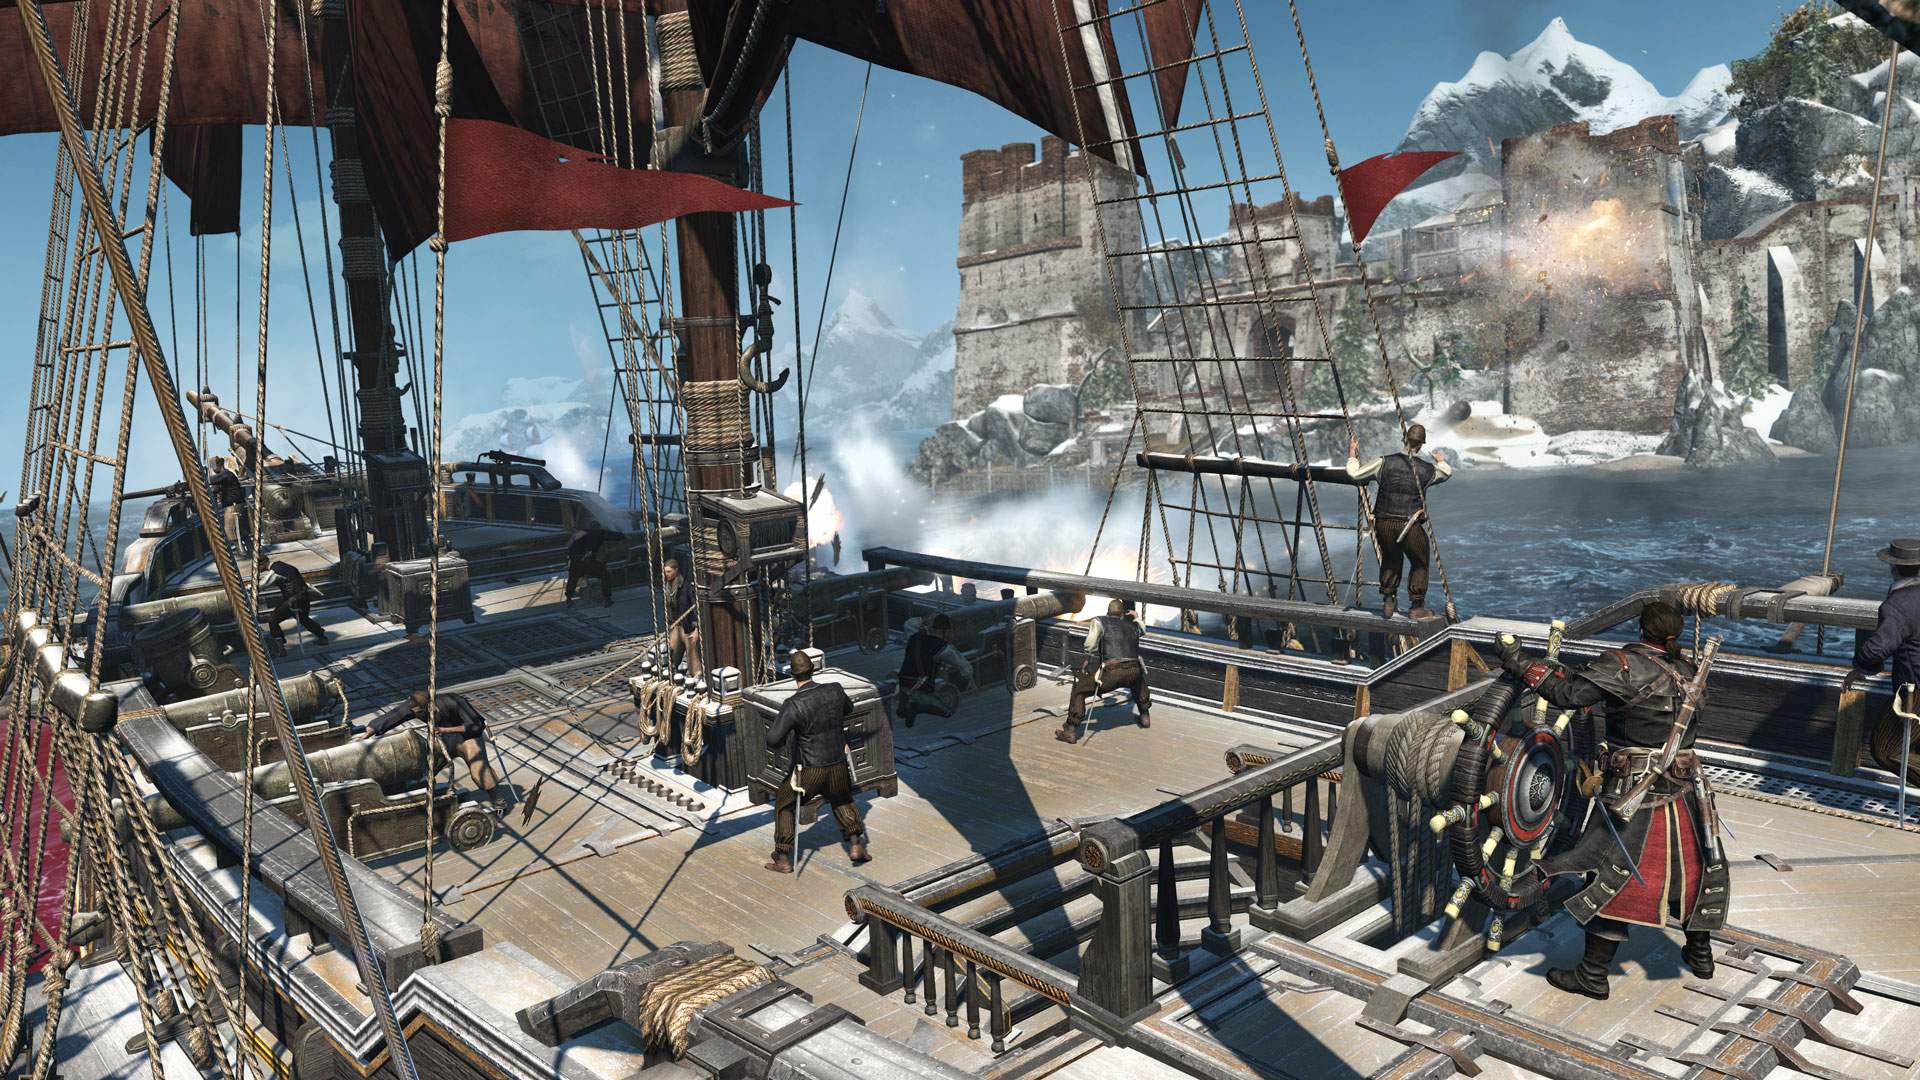 Media asset in full size related to 3dfxzone.it news item entitled as follows: Ubisoft promette gameplay in 4K con Assassin's Creed Rogue Remastered | Image Name: news27685_Assassin-s-Creed-Rogue-Remastered-Screenshot_2.jpg